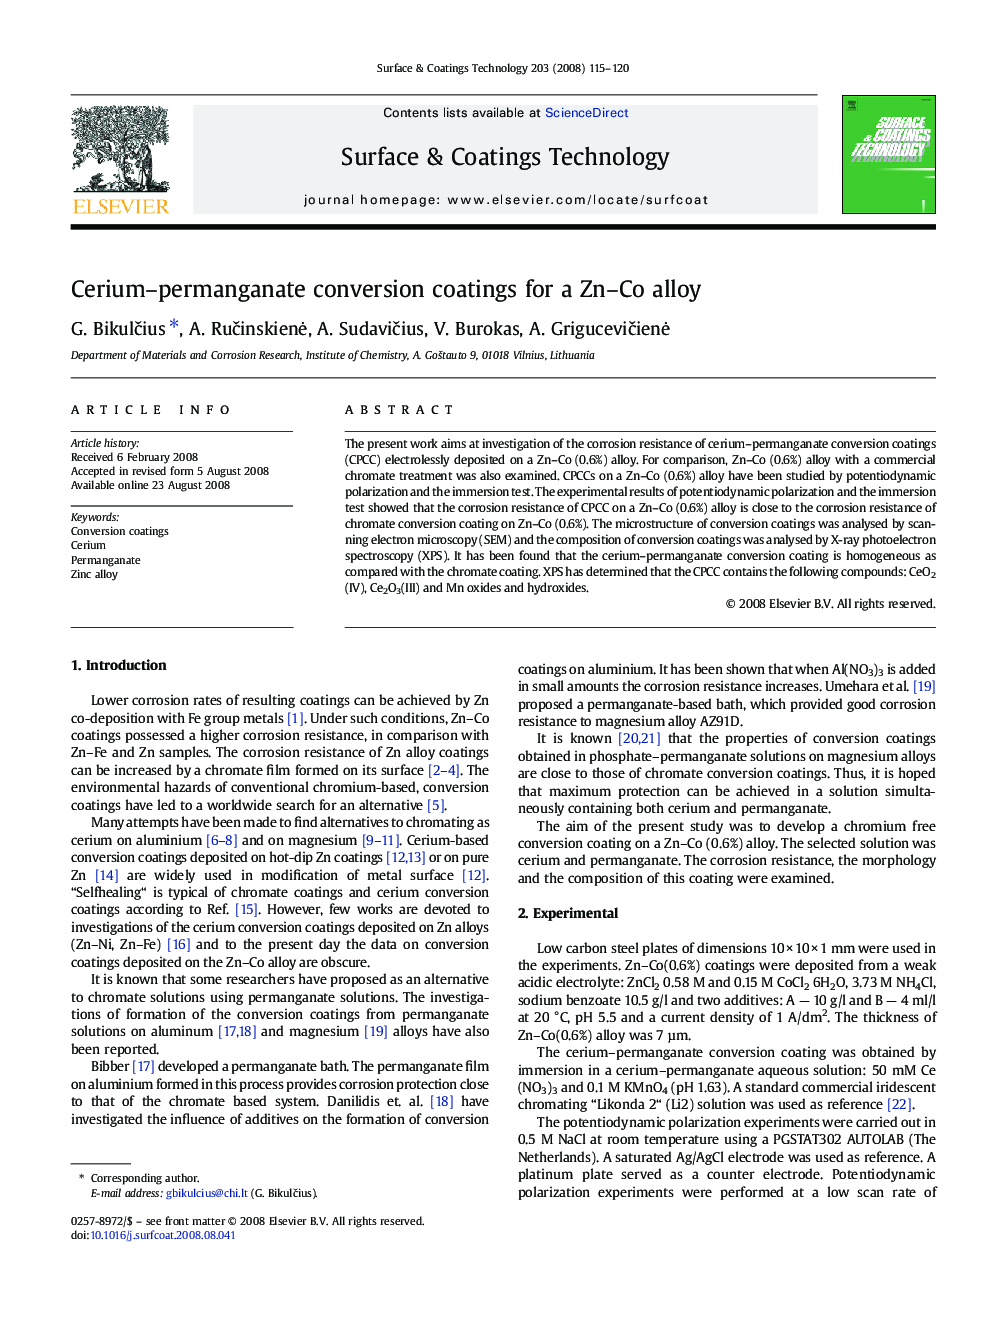 Cerium–permanganate conversion coatings for a Zn–Co alloy